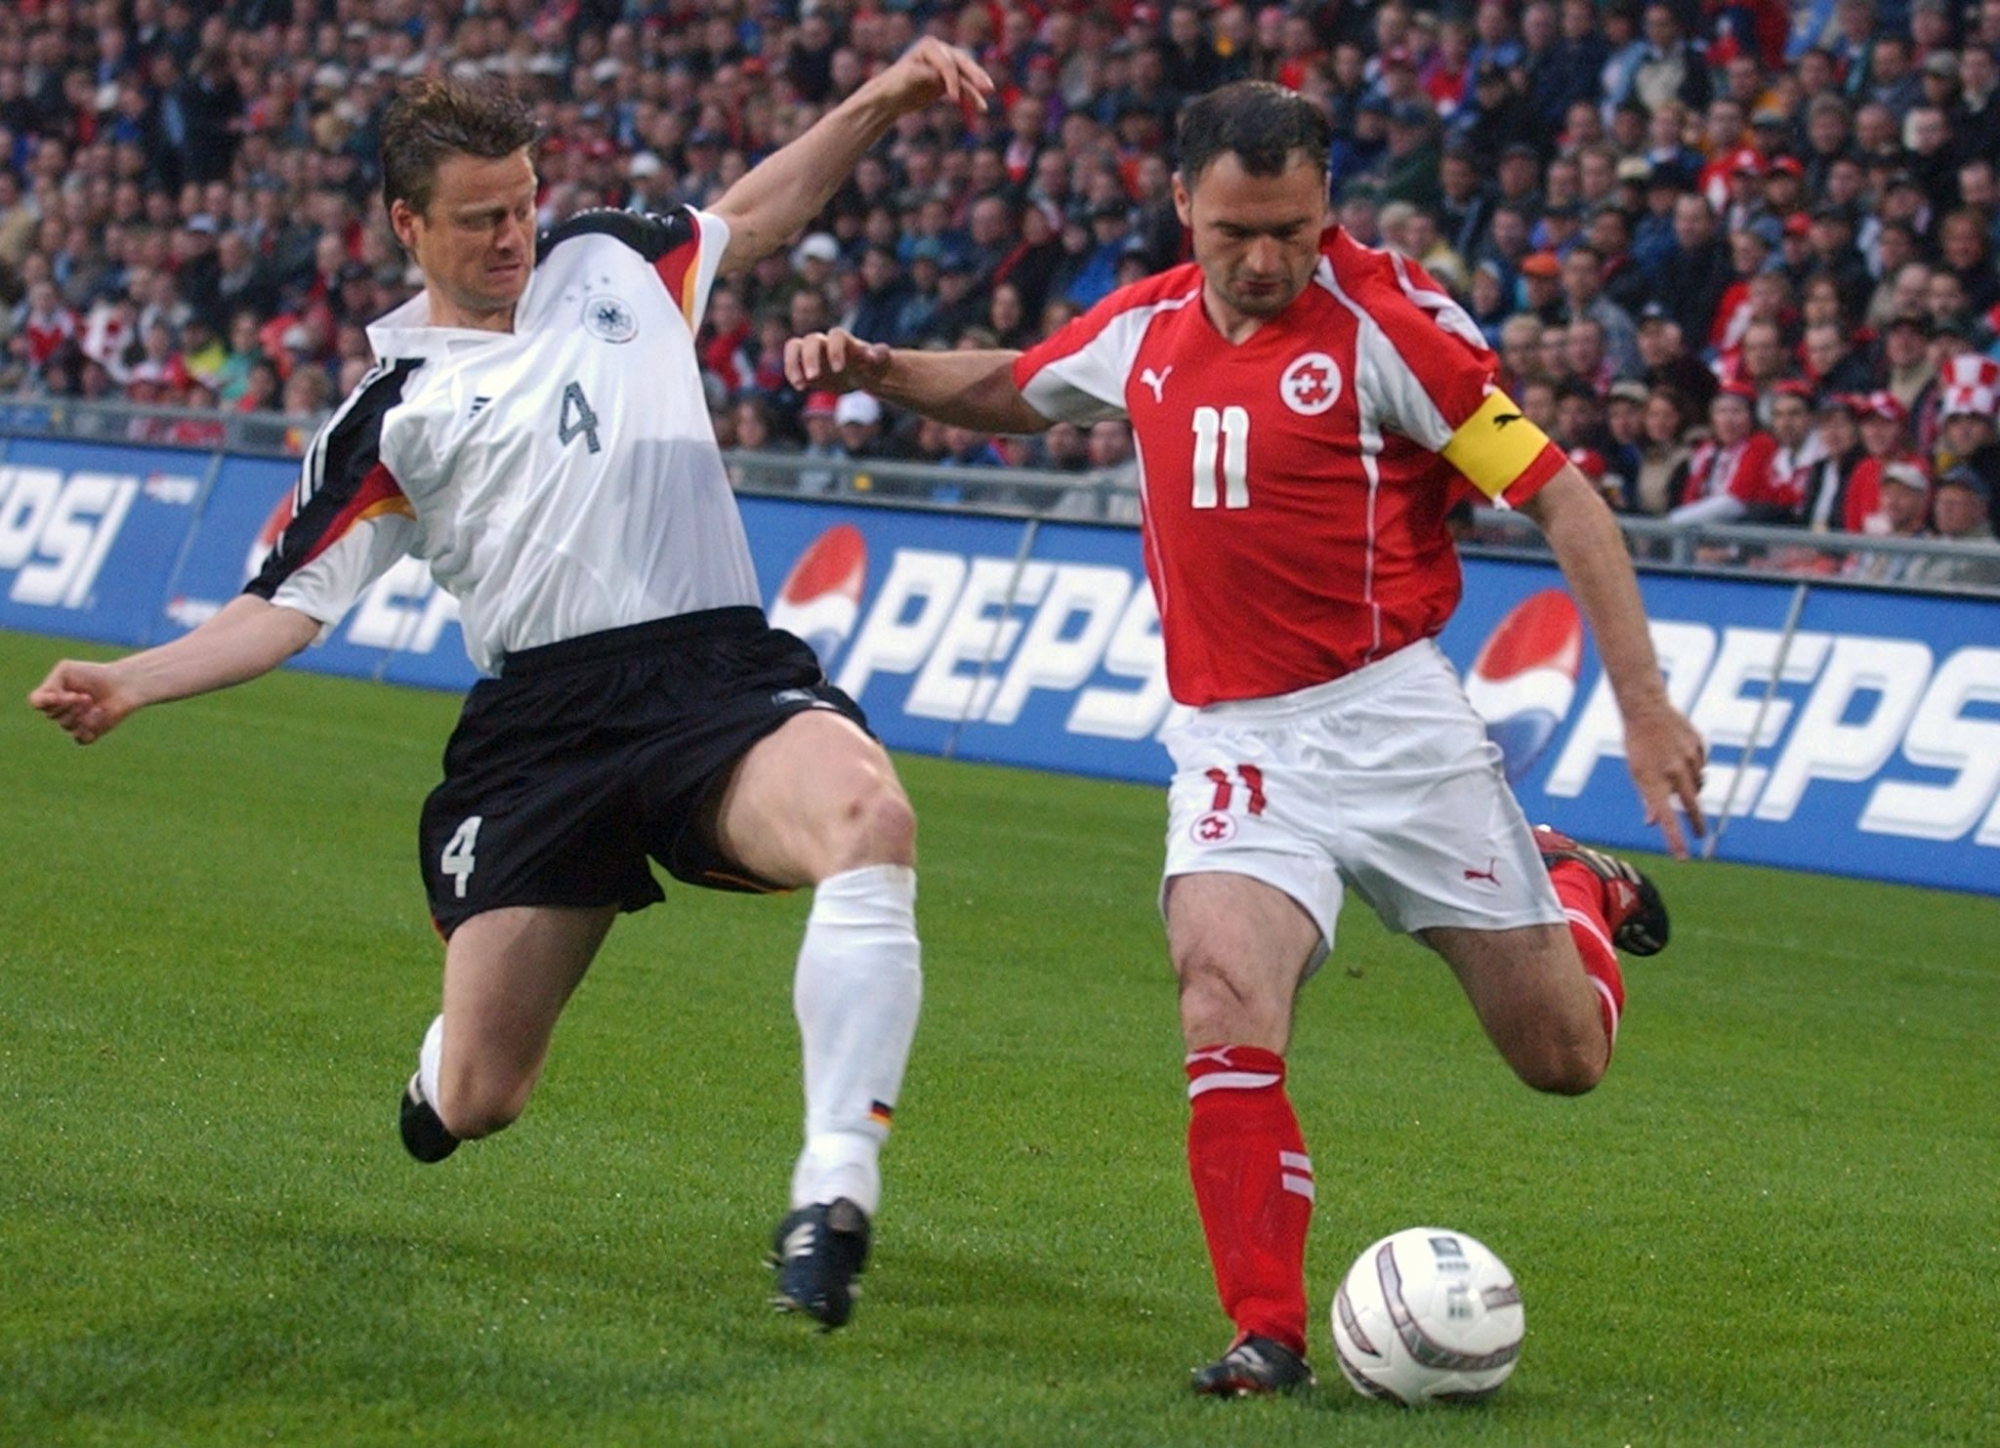 Swiss Stephane Chapuisat, right, tries to shoot against German Christian Woerns in a pre Euro2004 friendly soccer match between Switzerland and Germany, in Basel, Switzerland, Wednesday, June 2, 2004. Chapuisat plays his 100th game with the Swiss team. (KEYSTONE/Walter Bieri) FUSSBALL SCHWEIZ DEUTSCHLAND